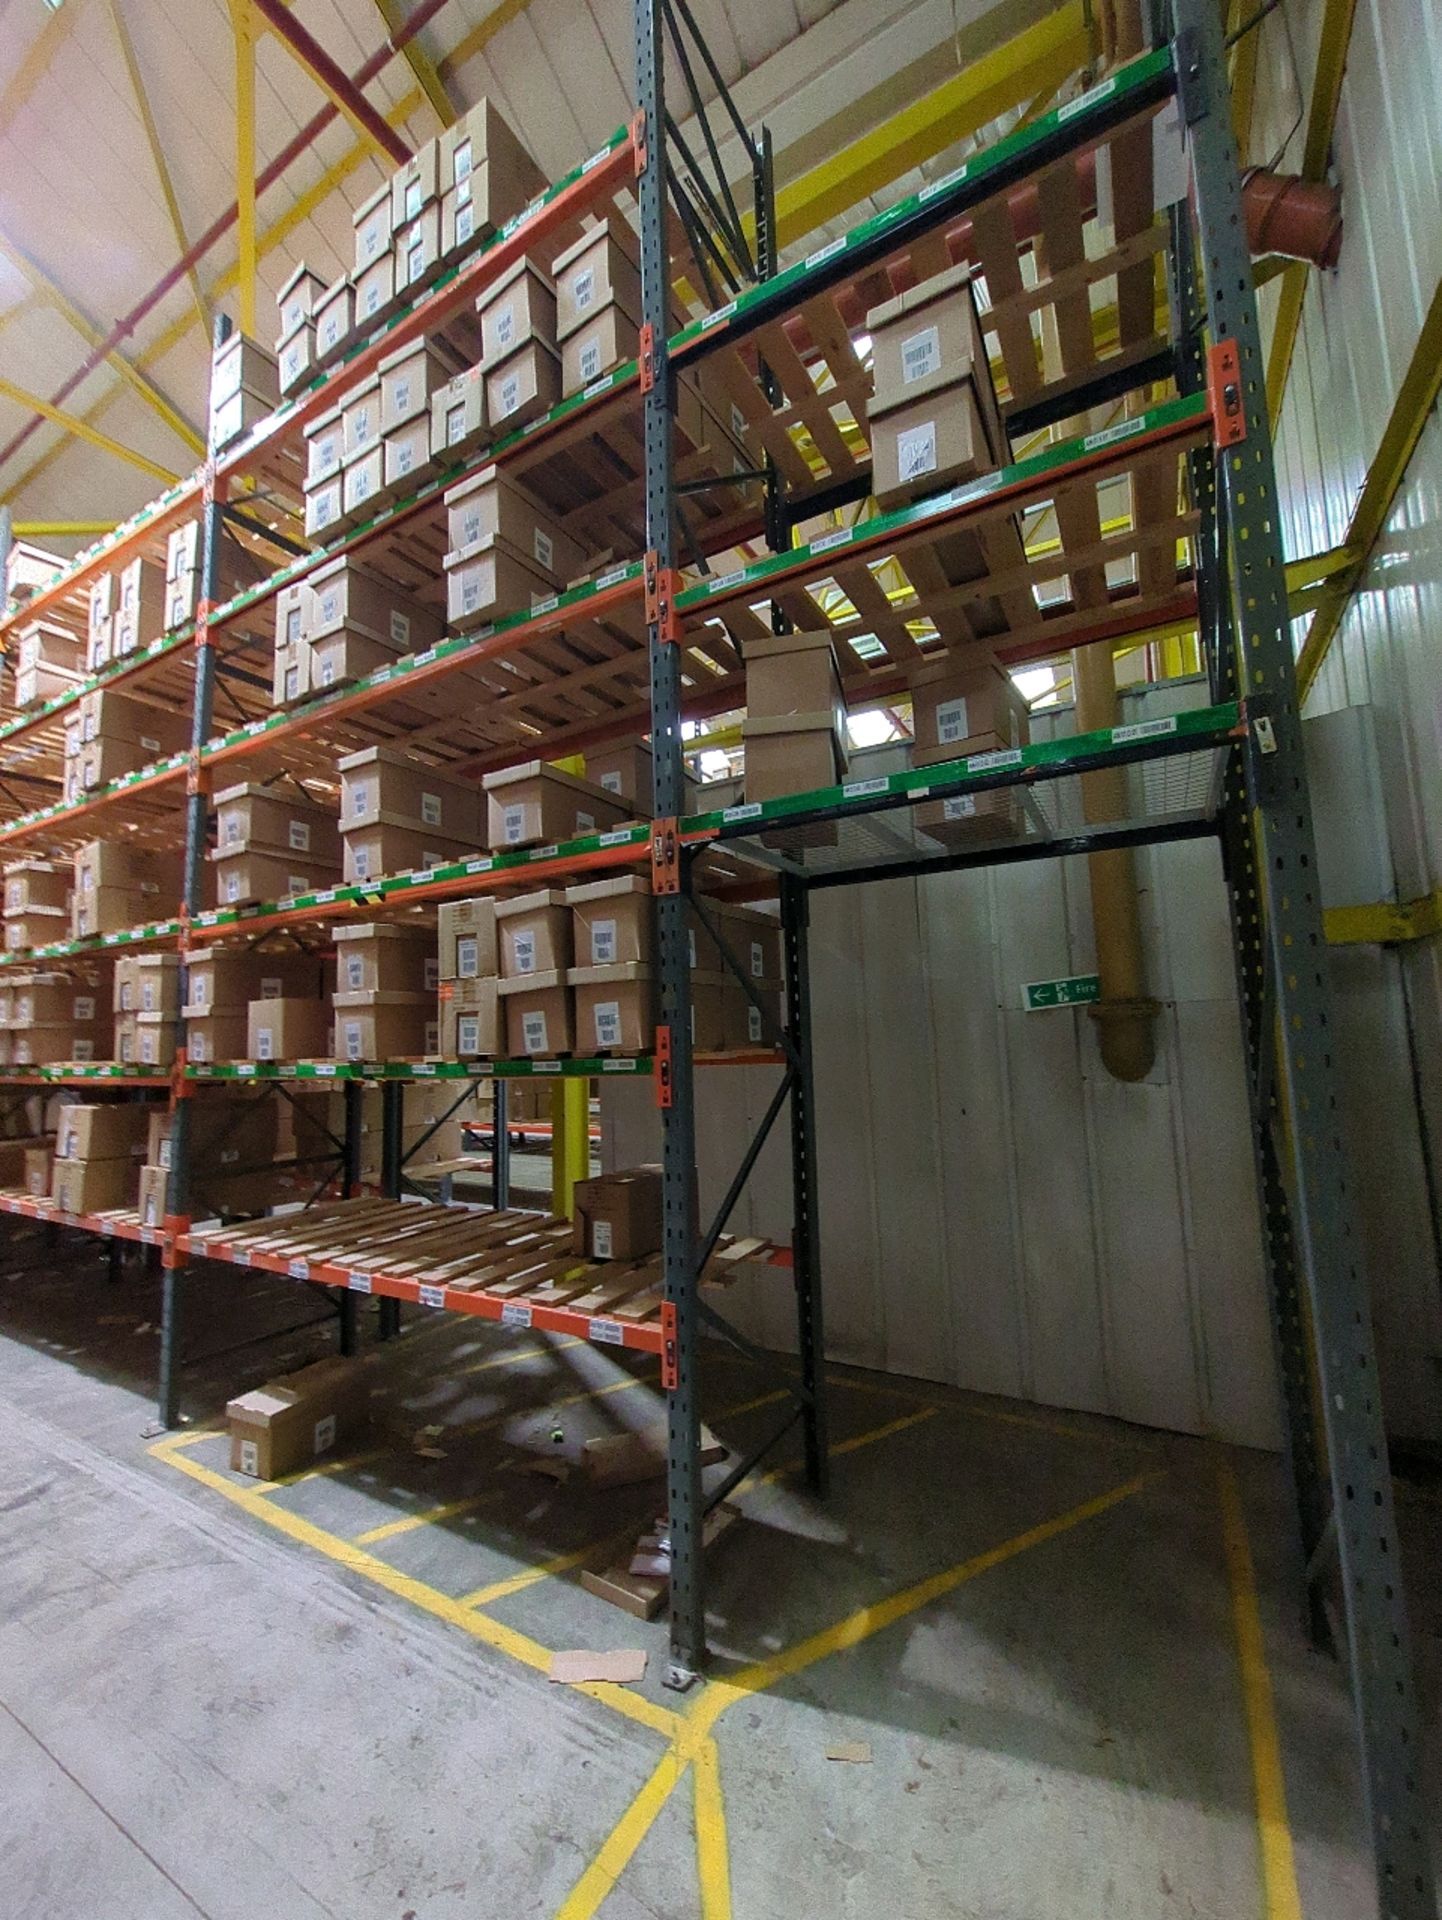 Run Of 43 Bays Of Boltless Industrial Pallet Racking - Image 18 of 21